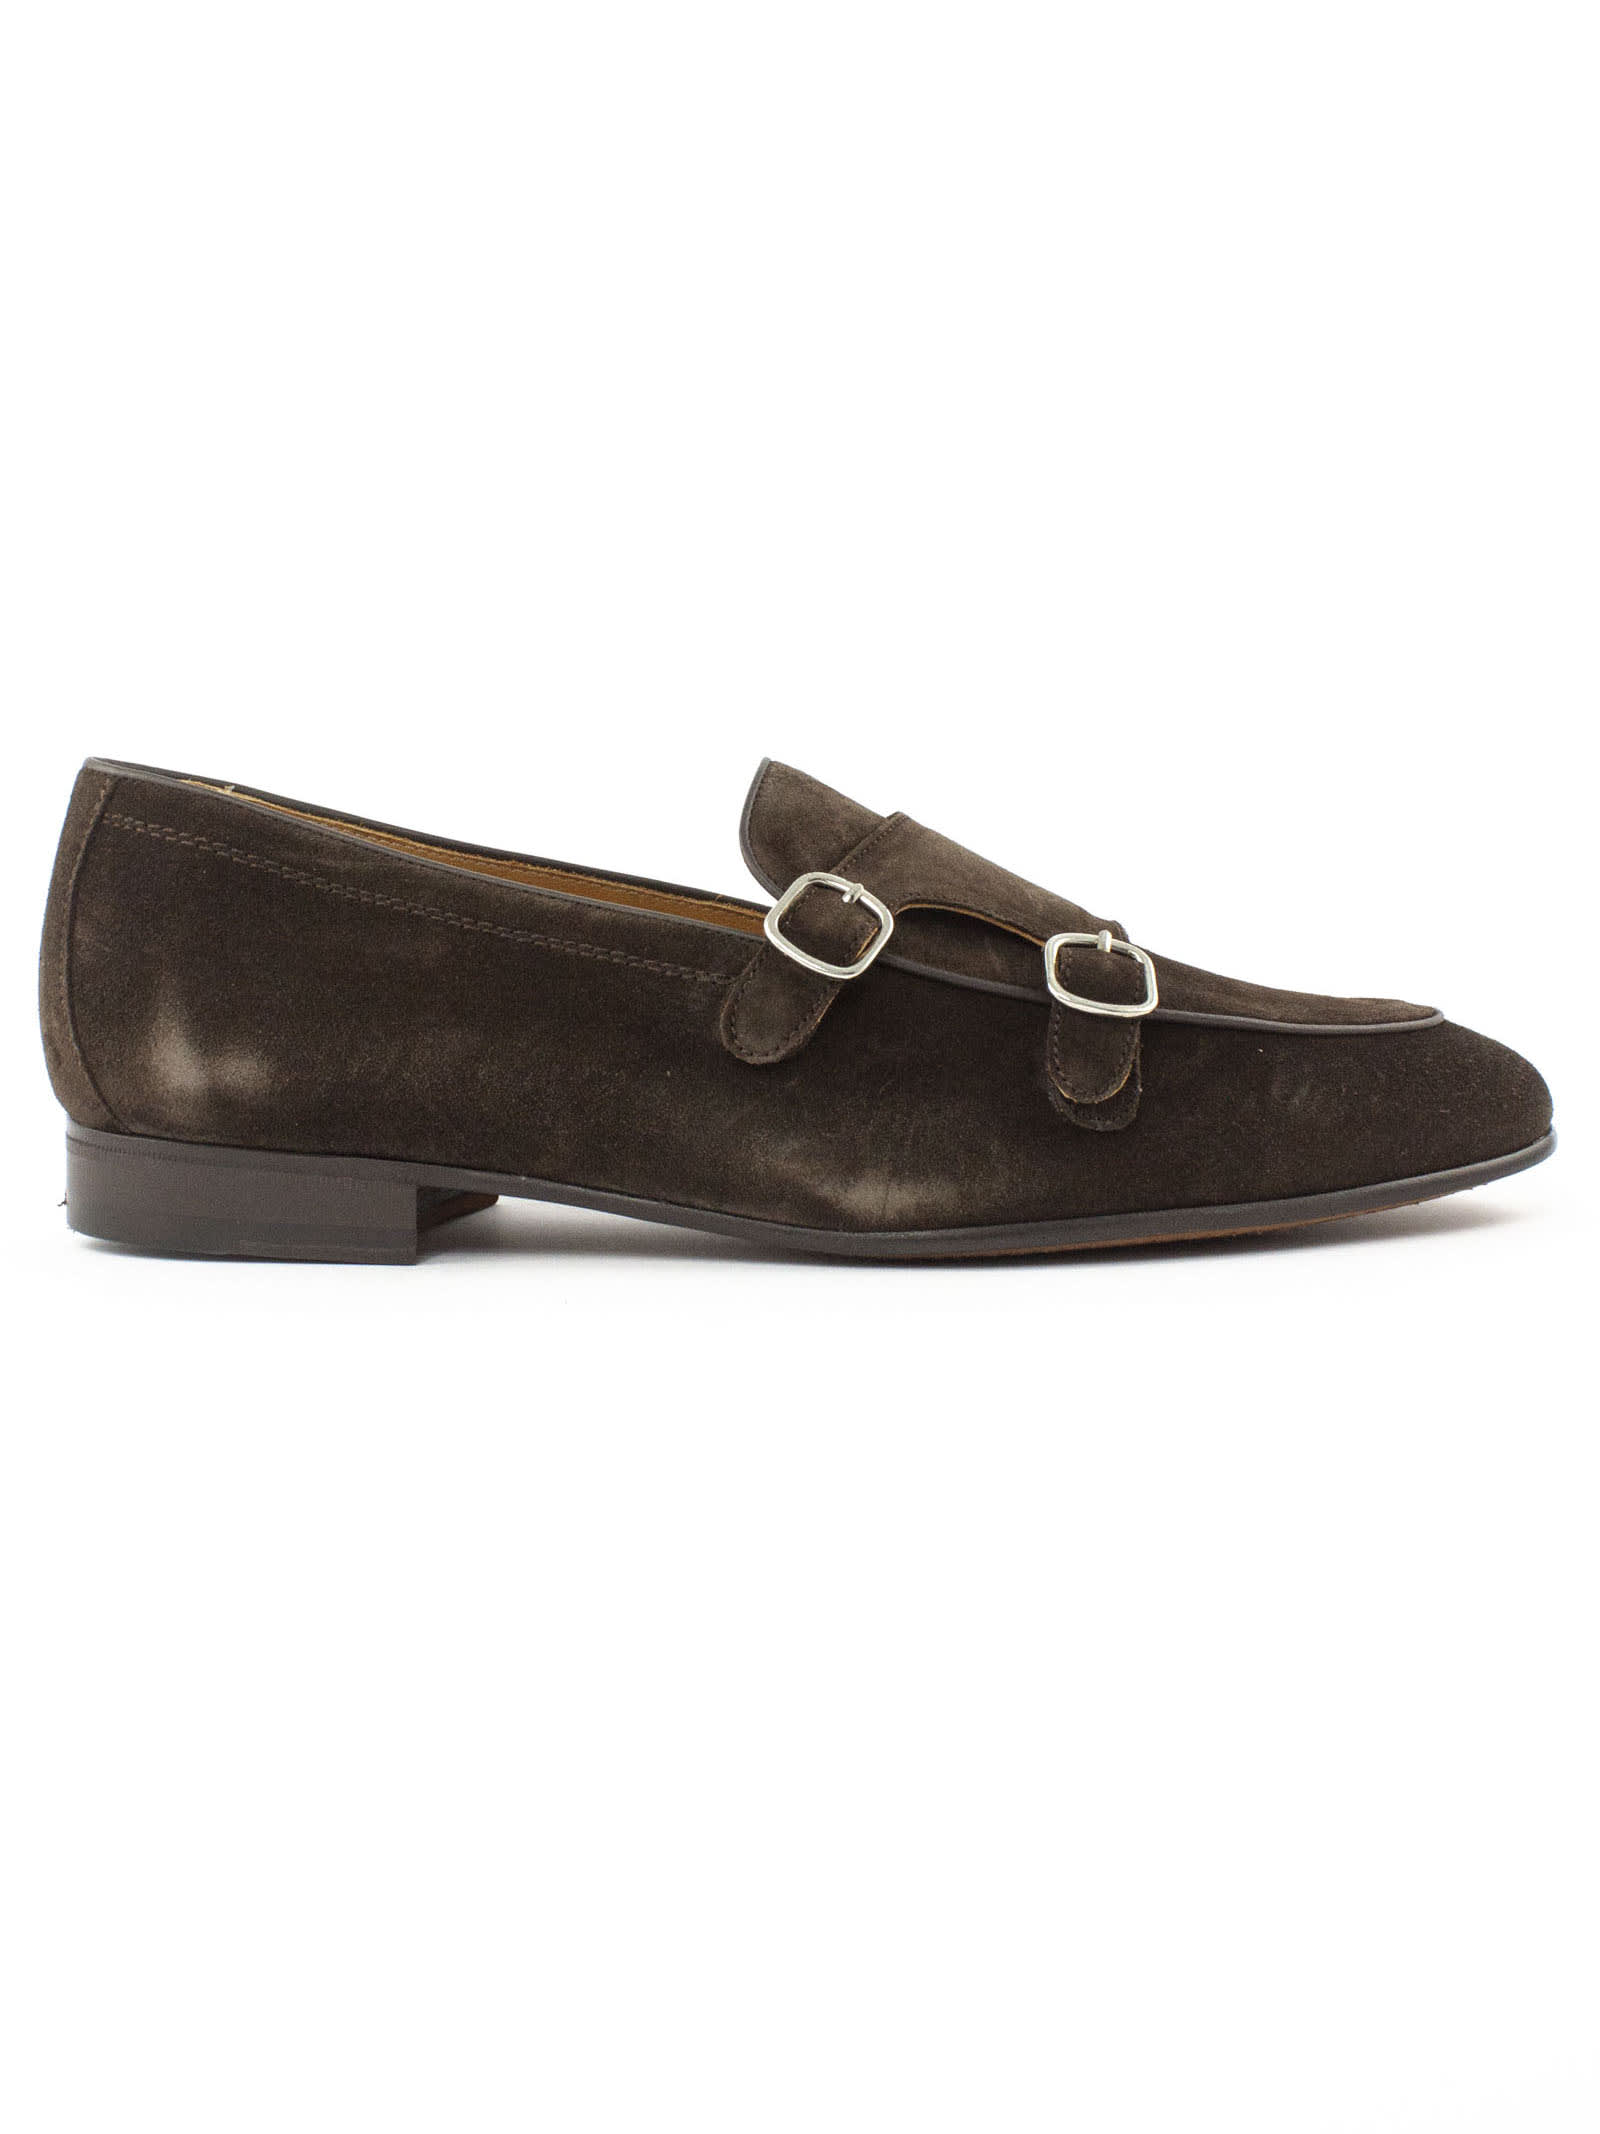 Berwick 1707 Brown Suede Loafer